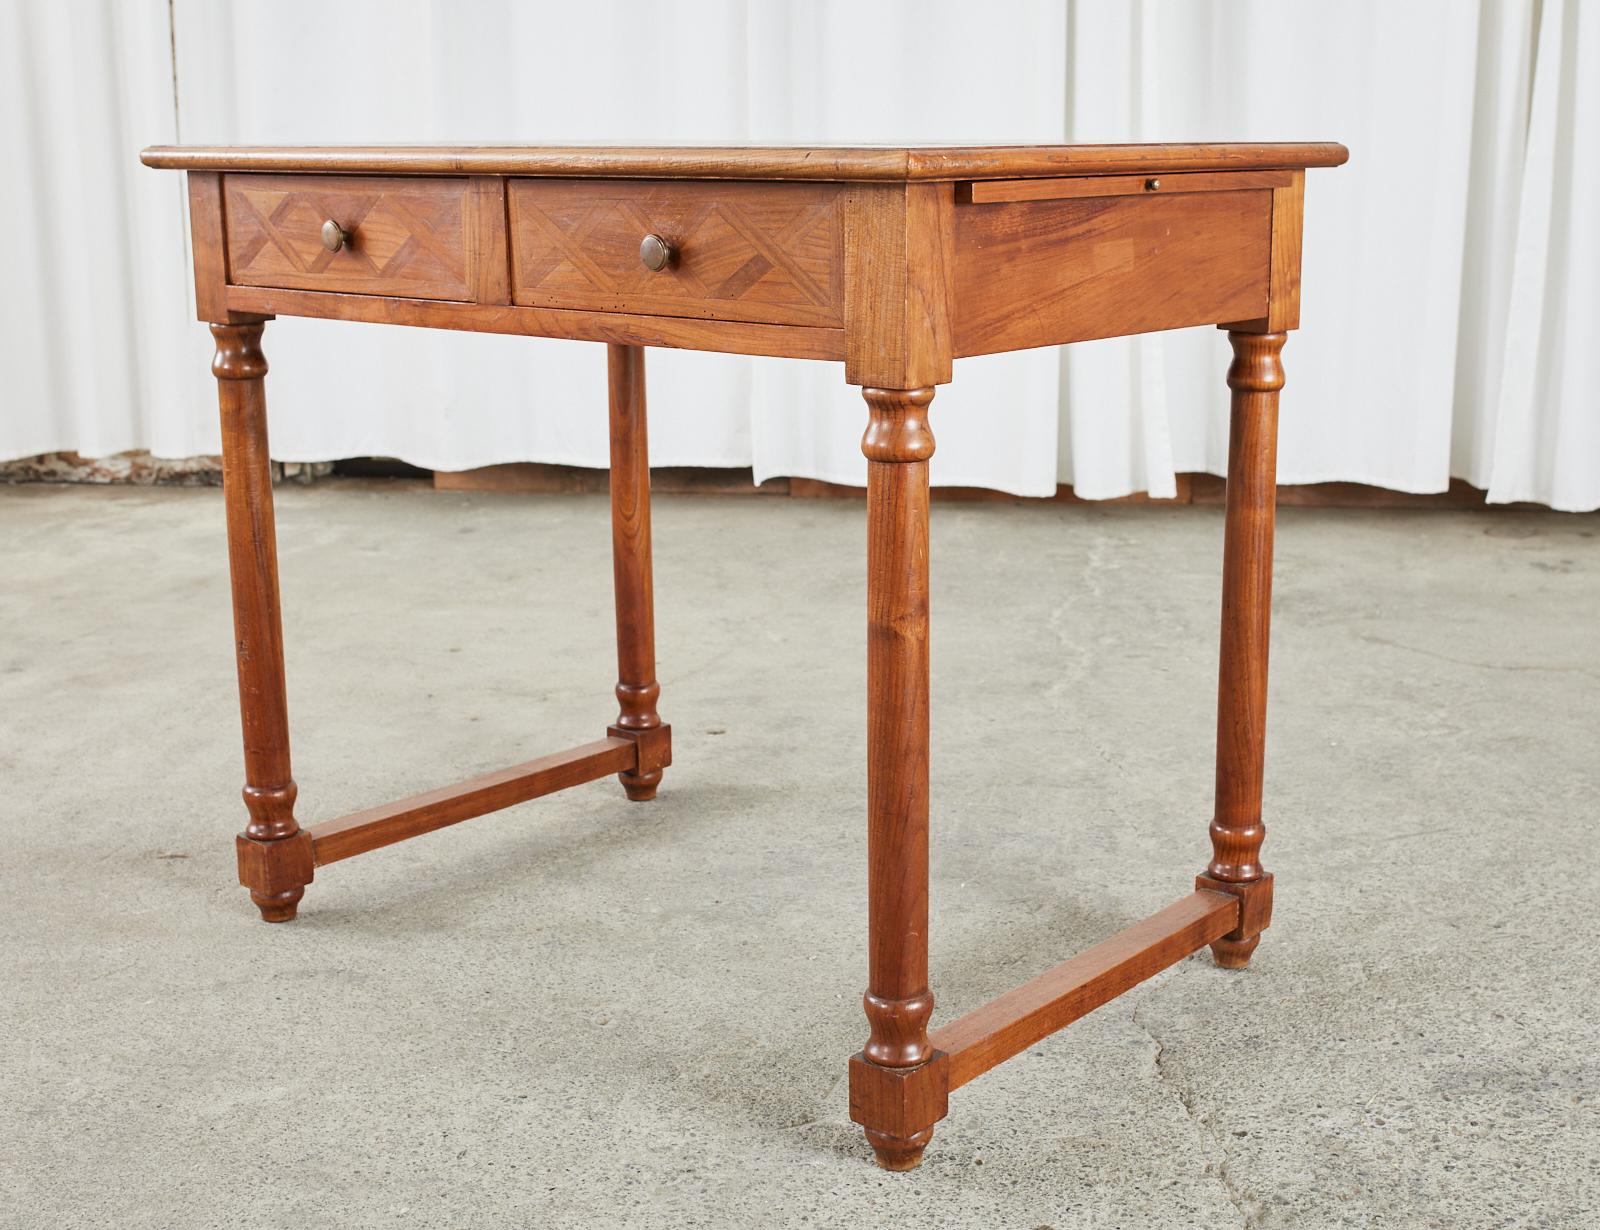 Elegant writing table or desk made on a diminutive scale in the French Louis Philippe taste. The table features an amazing parquetry inlay on the top and drawer fronts having geometric neoclassical style x-form designs. The case is fronted by two